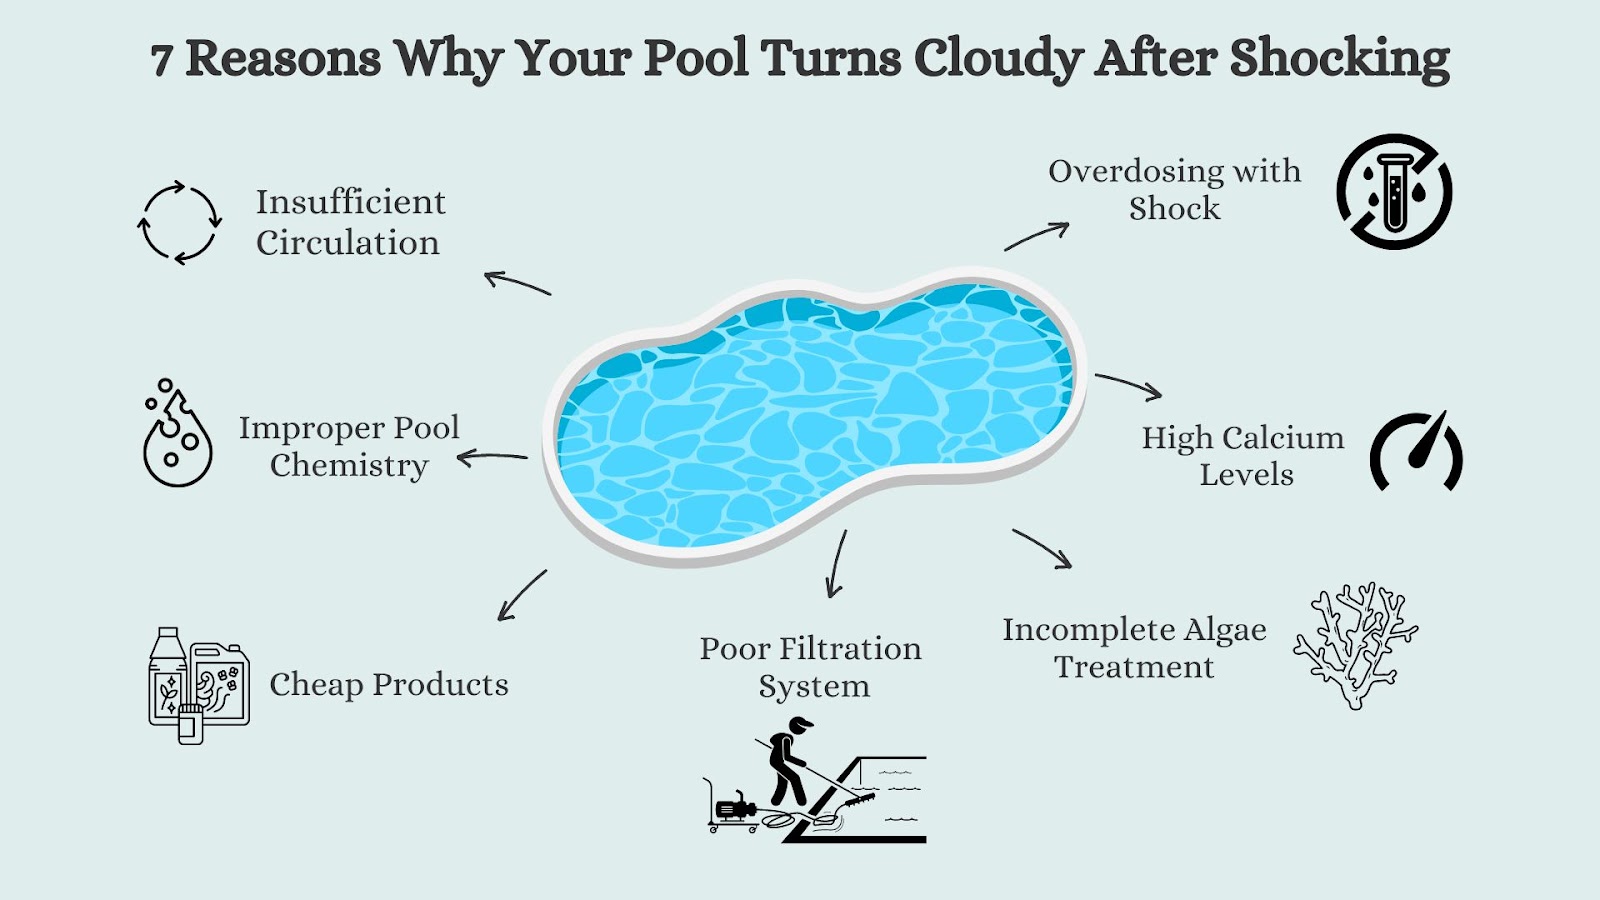 7 Reasons Why Your Pool Turns Cloudy After Shocking